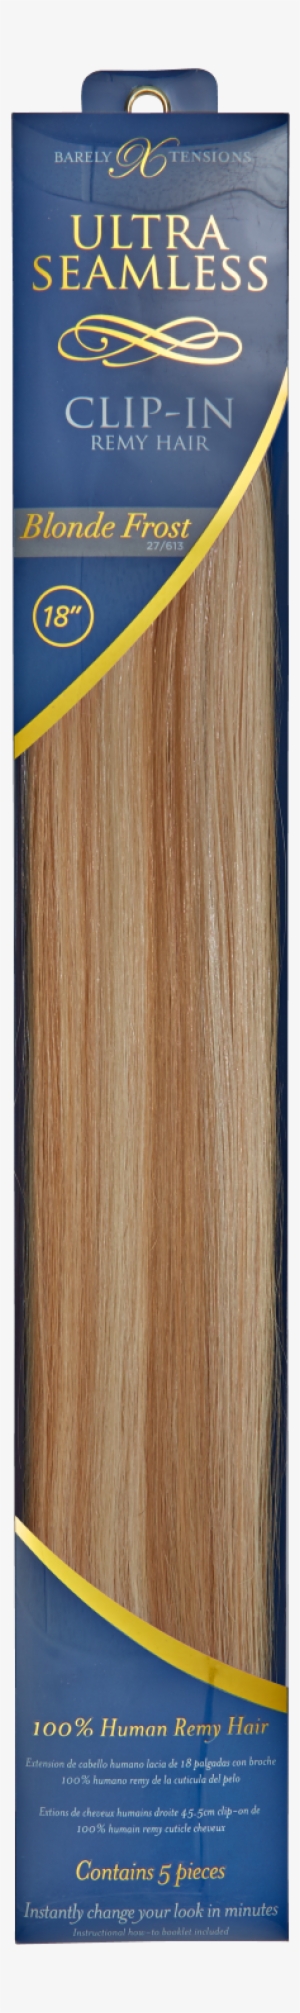 Barely Xtensions Ultra Seamless Clip Remy Hair